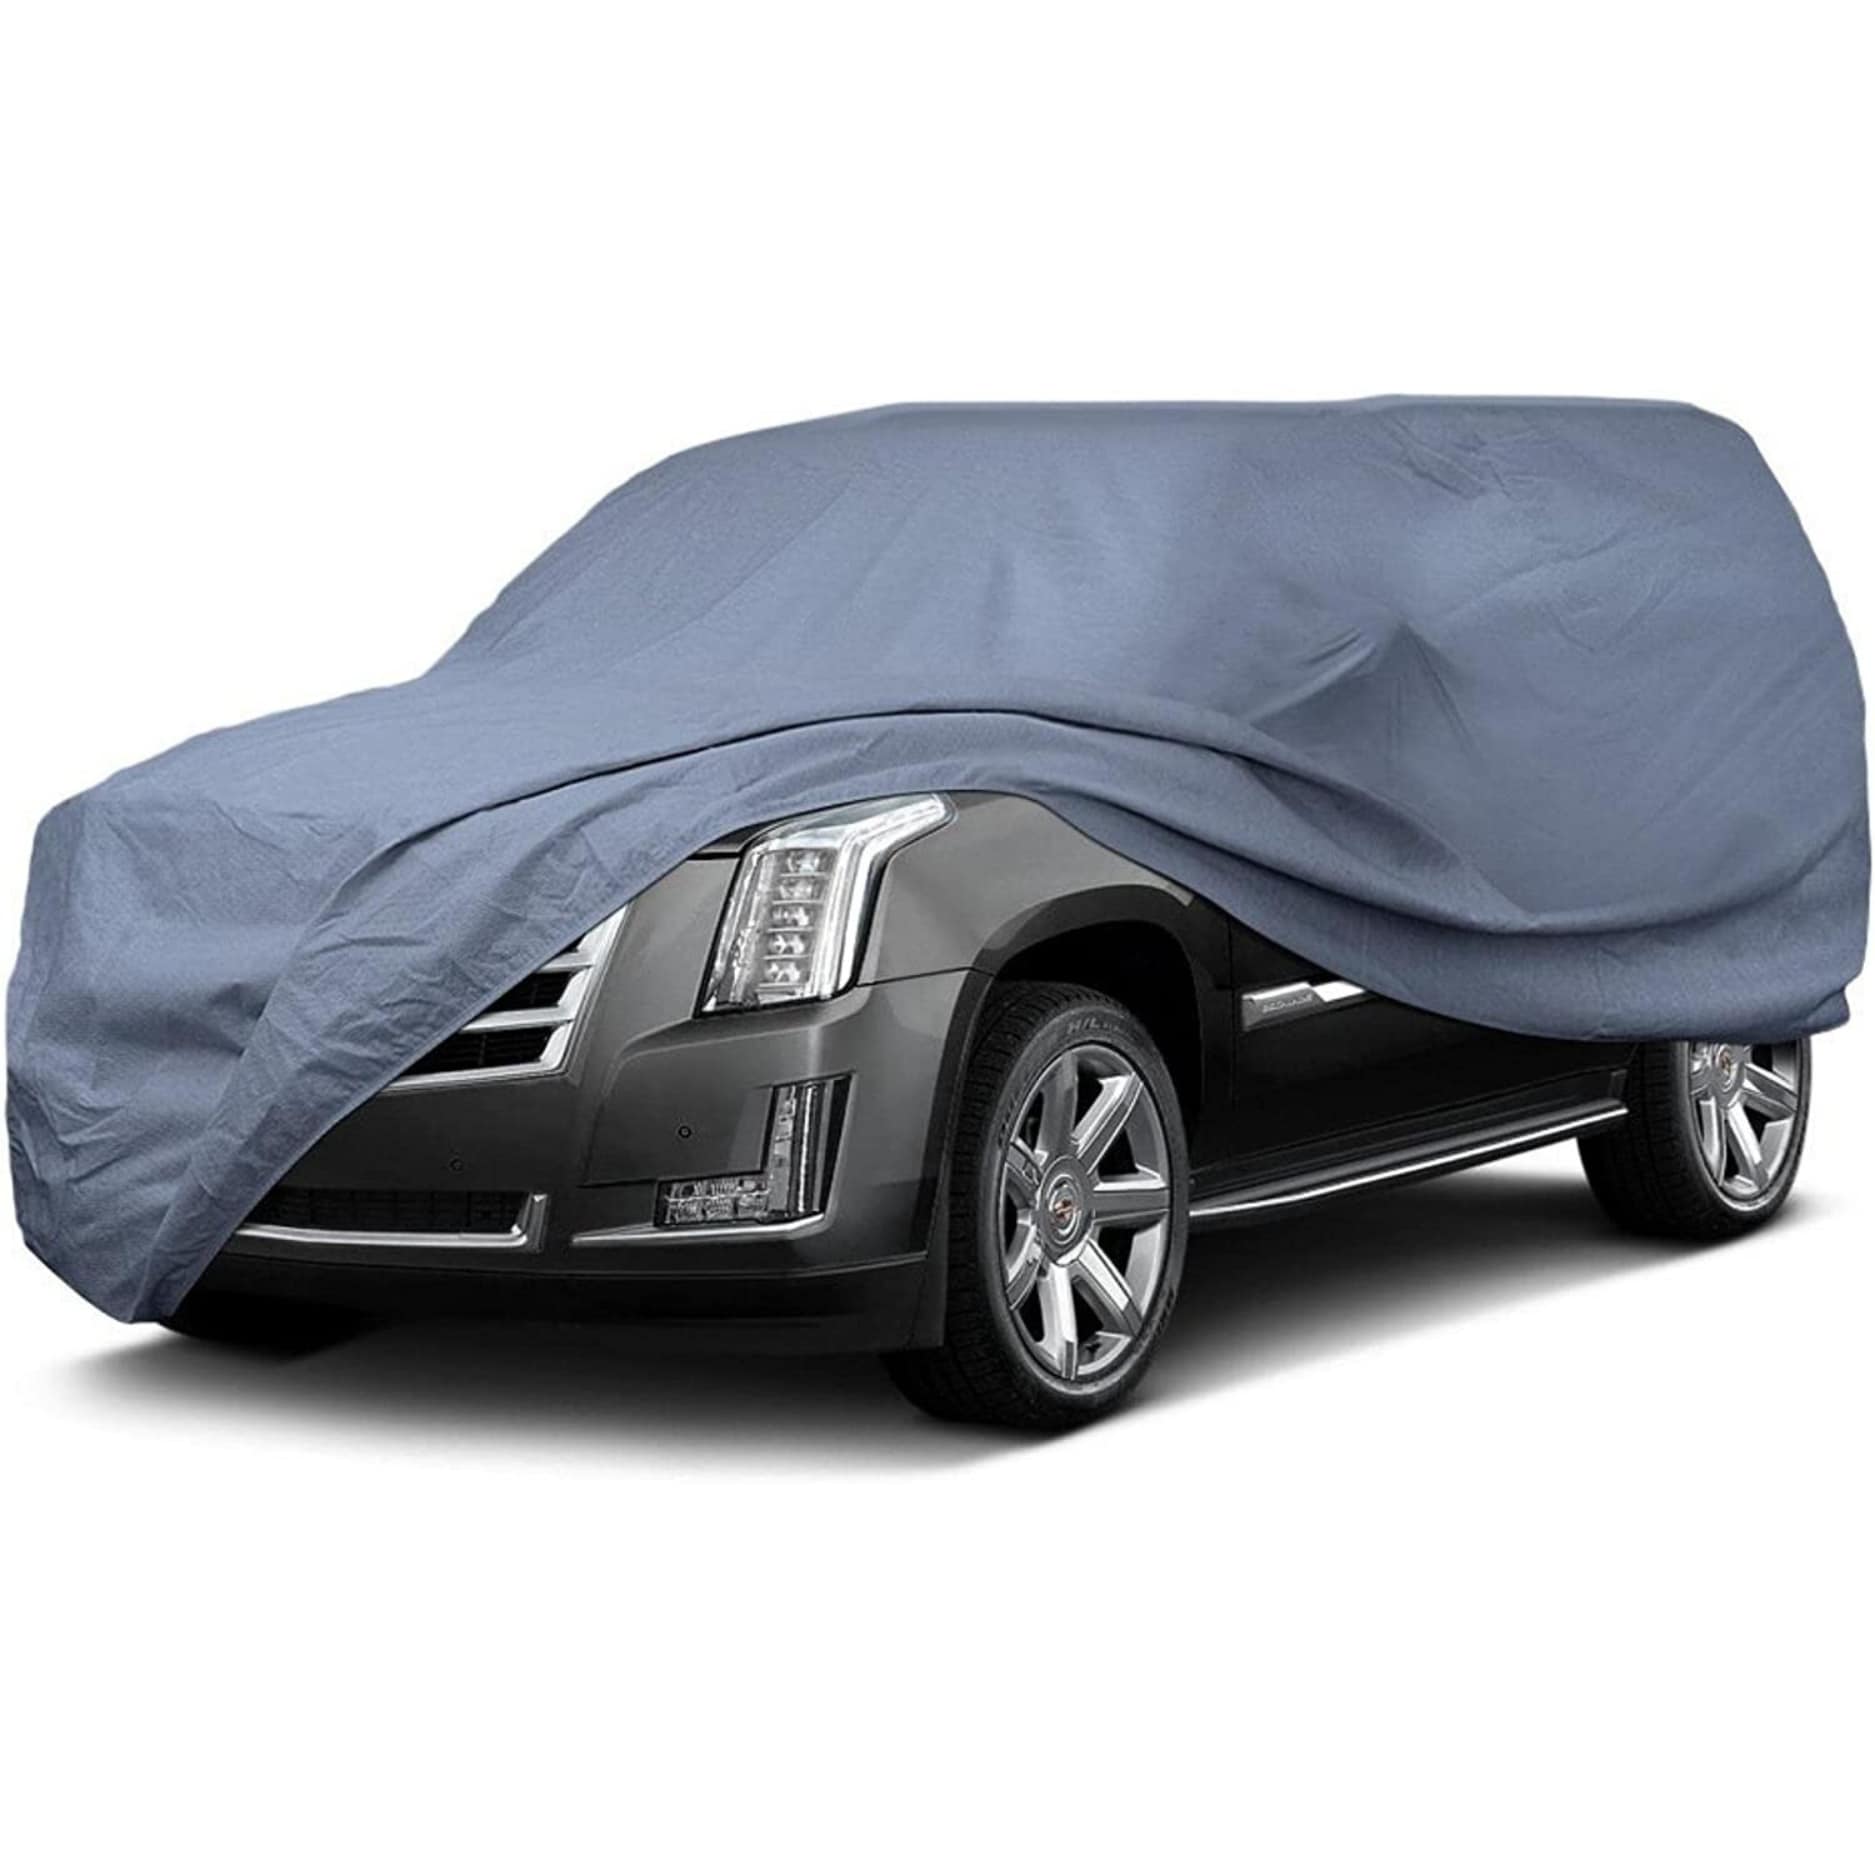 CarCovers Weatherproof Car Cover Compatible with Volkswagen 2007-2016 Eos -  Outdoor & Indoor Cover - Rain, Snow, Hail, Sun - Theft Cable Lock, Bag 